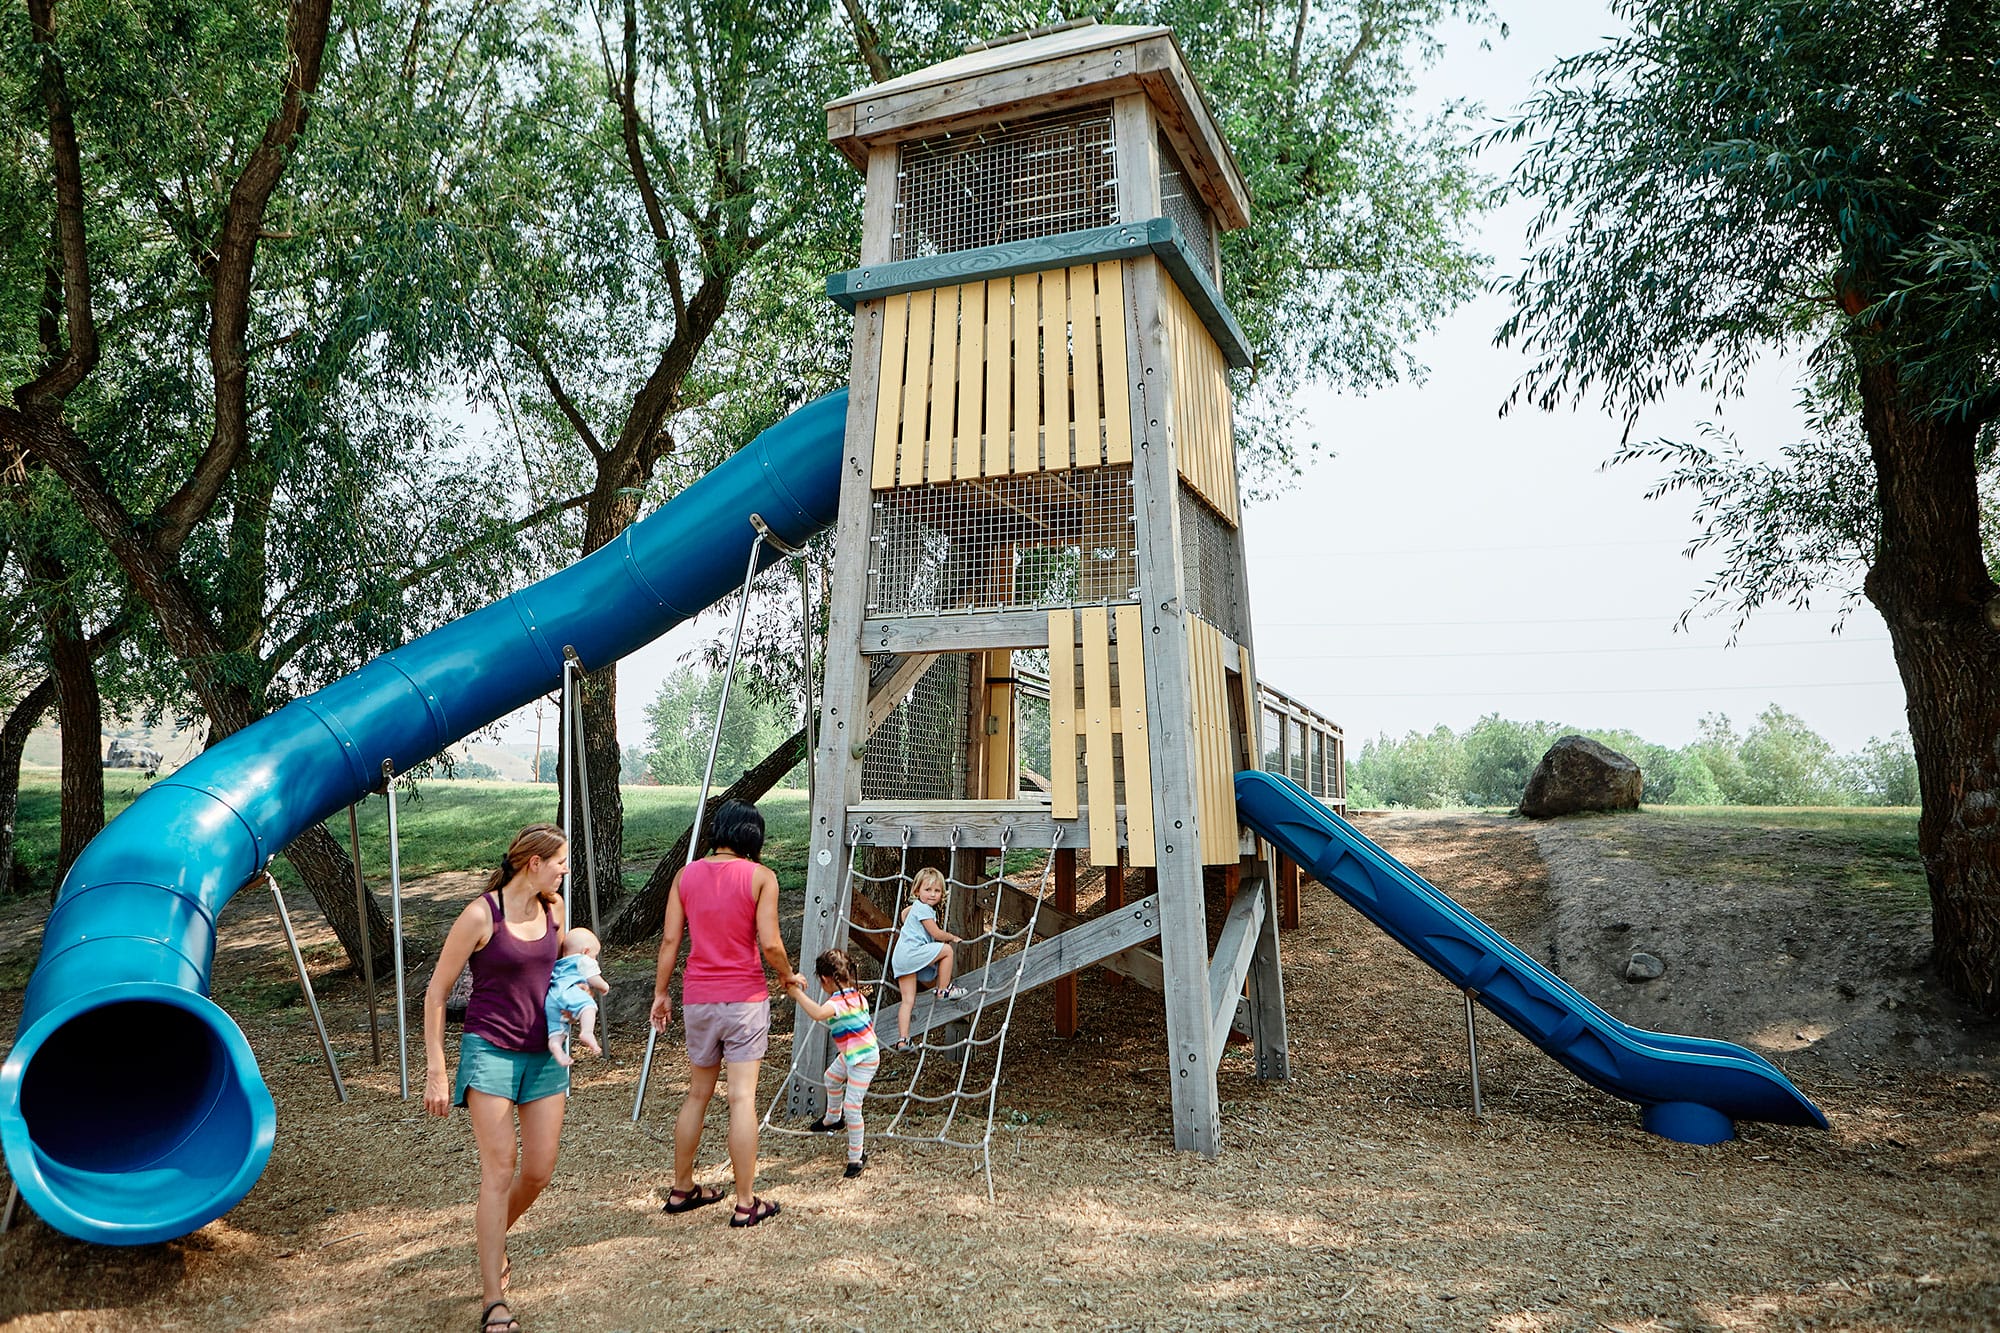 A children's playground with a slide and swings.